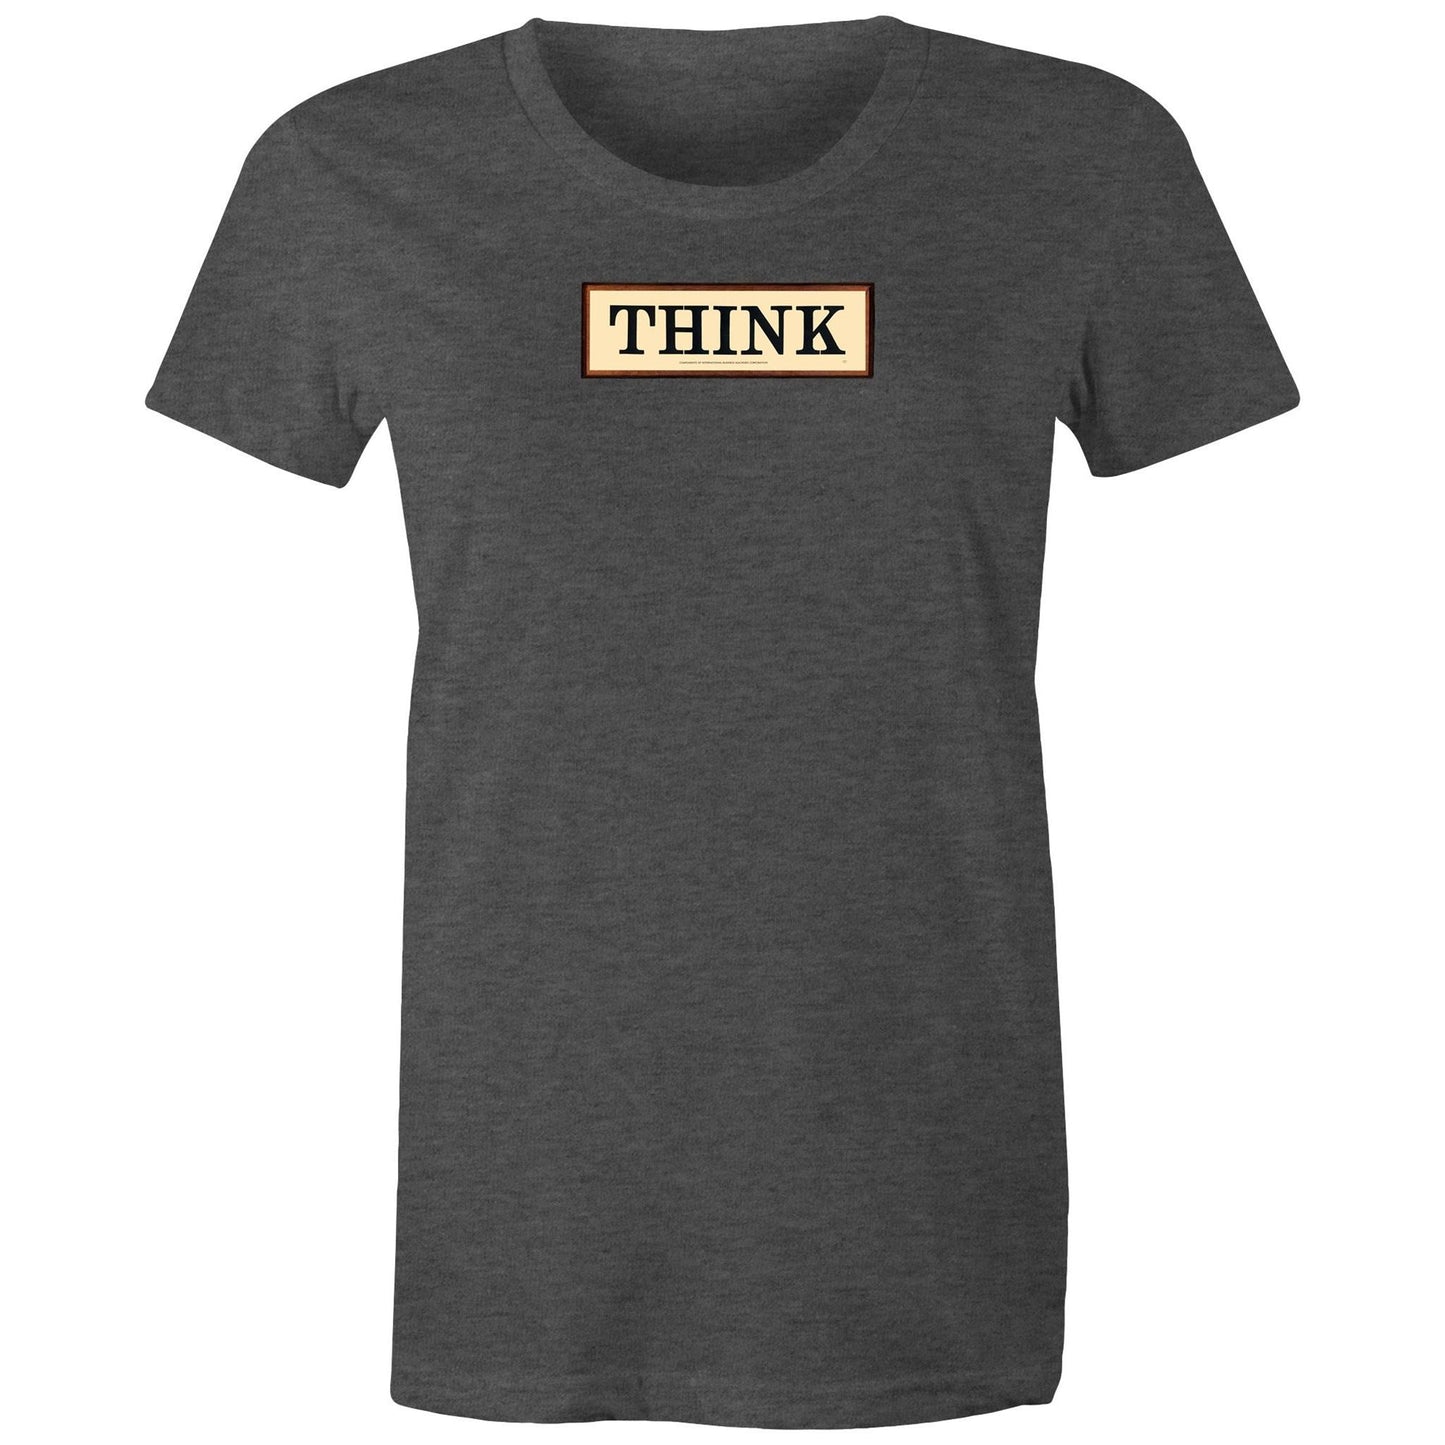 THINK Sign T Shirts for Women